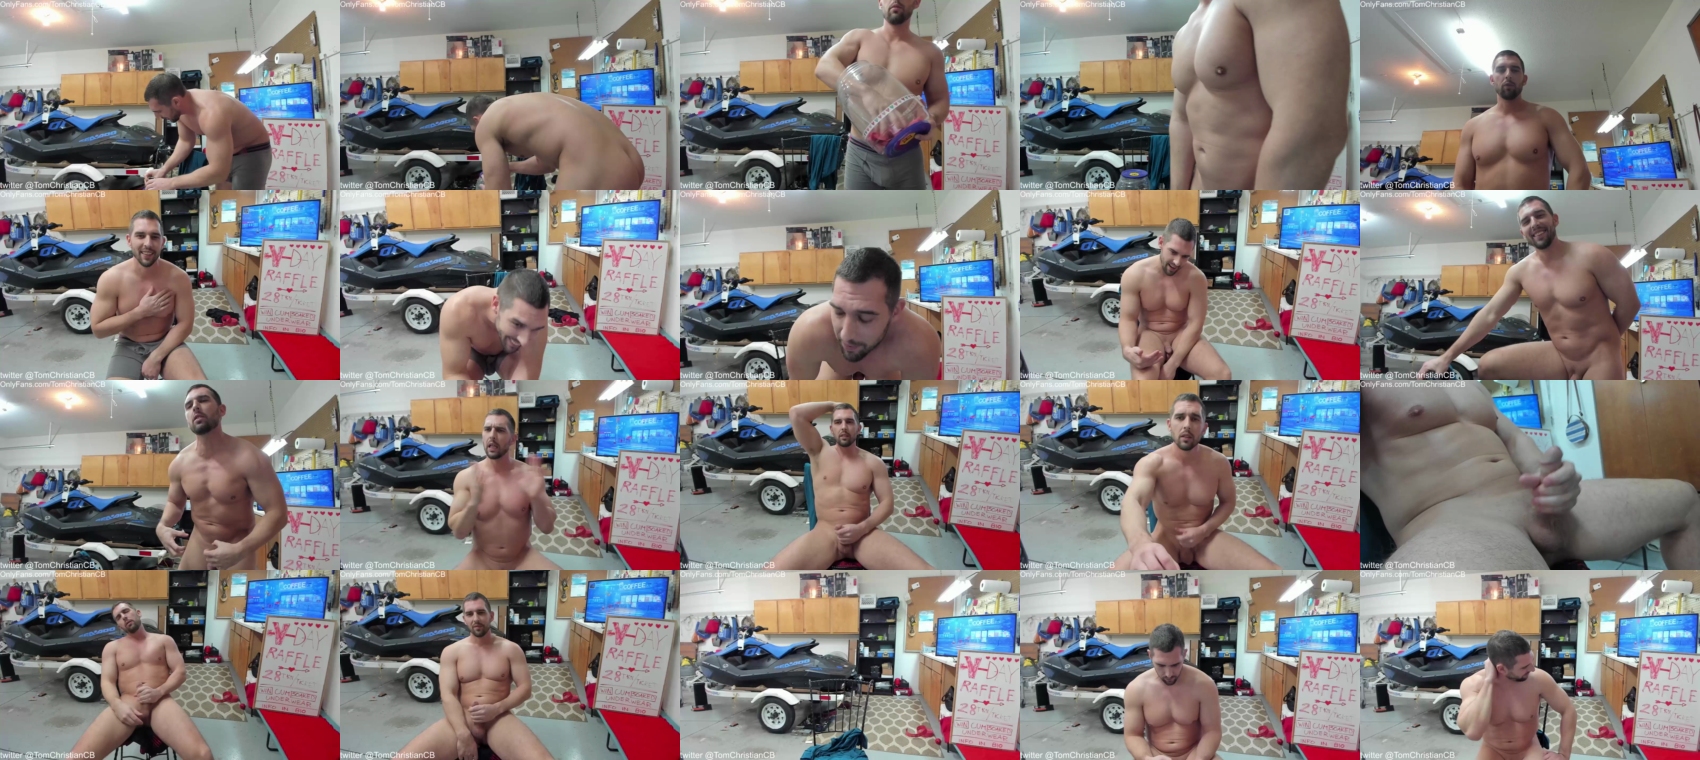 tomchristiancb squirt CAM SHOW @ Chaturbate 09-02-2023